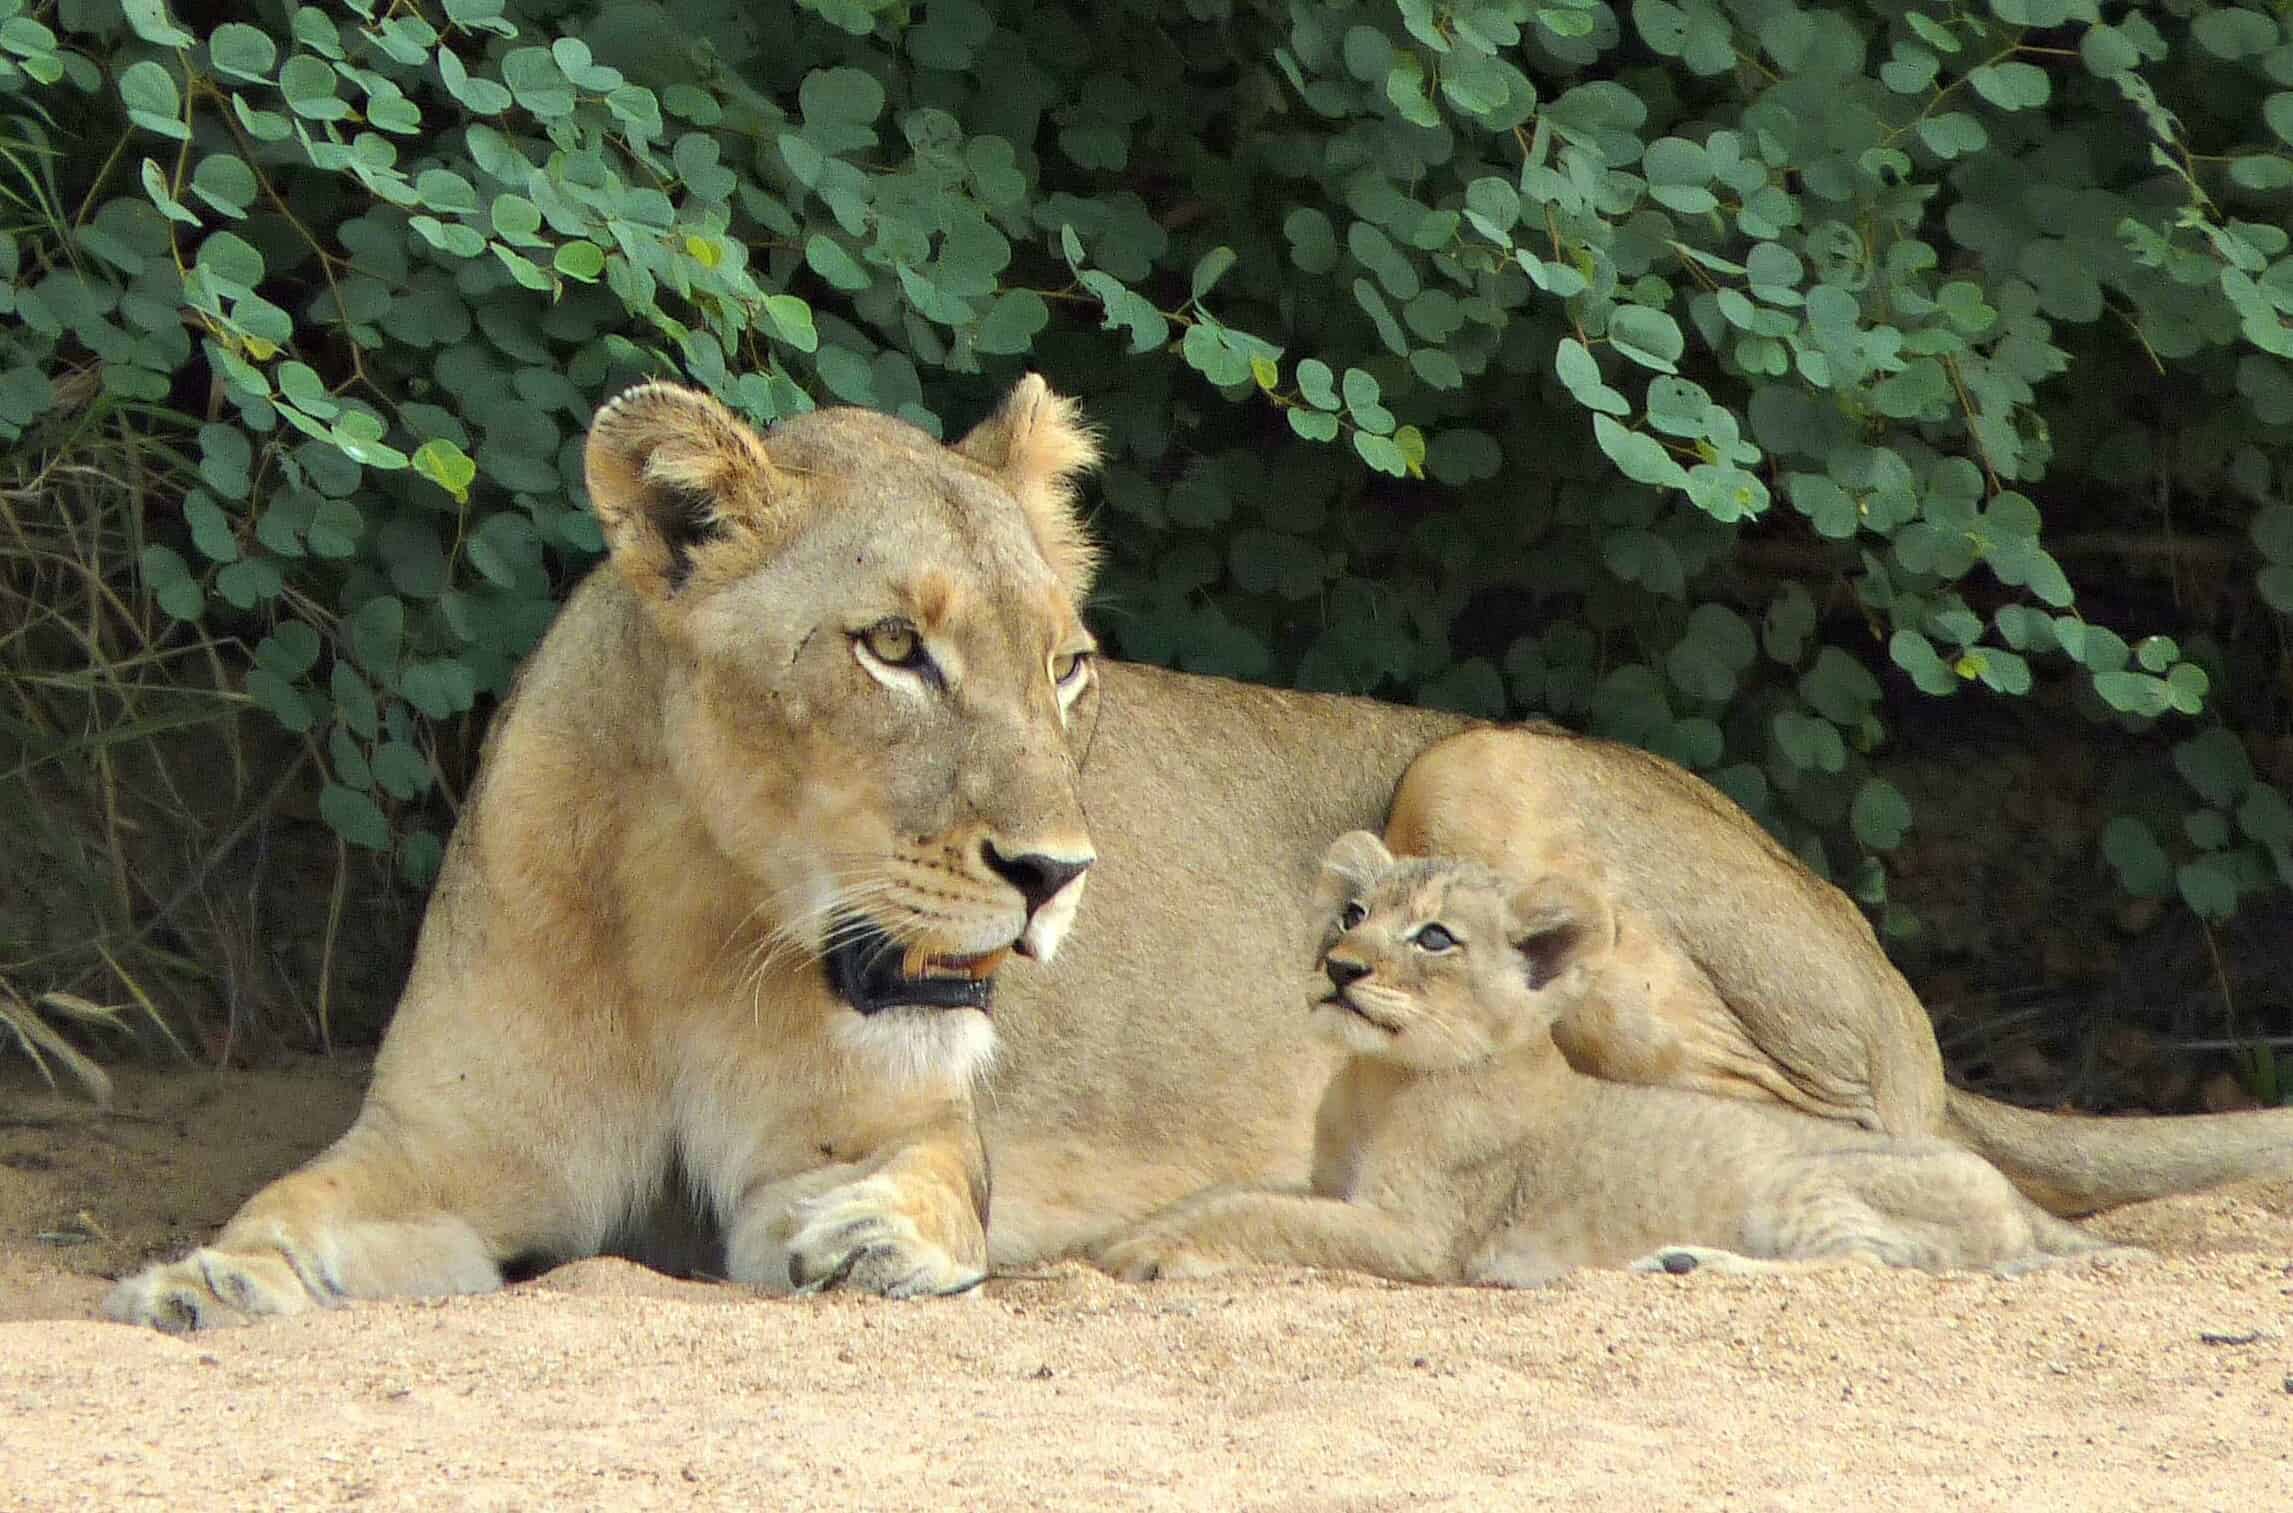 Lion & Cub, Kruger National Park, on the list to see the Big 5 on safari